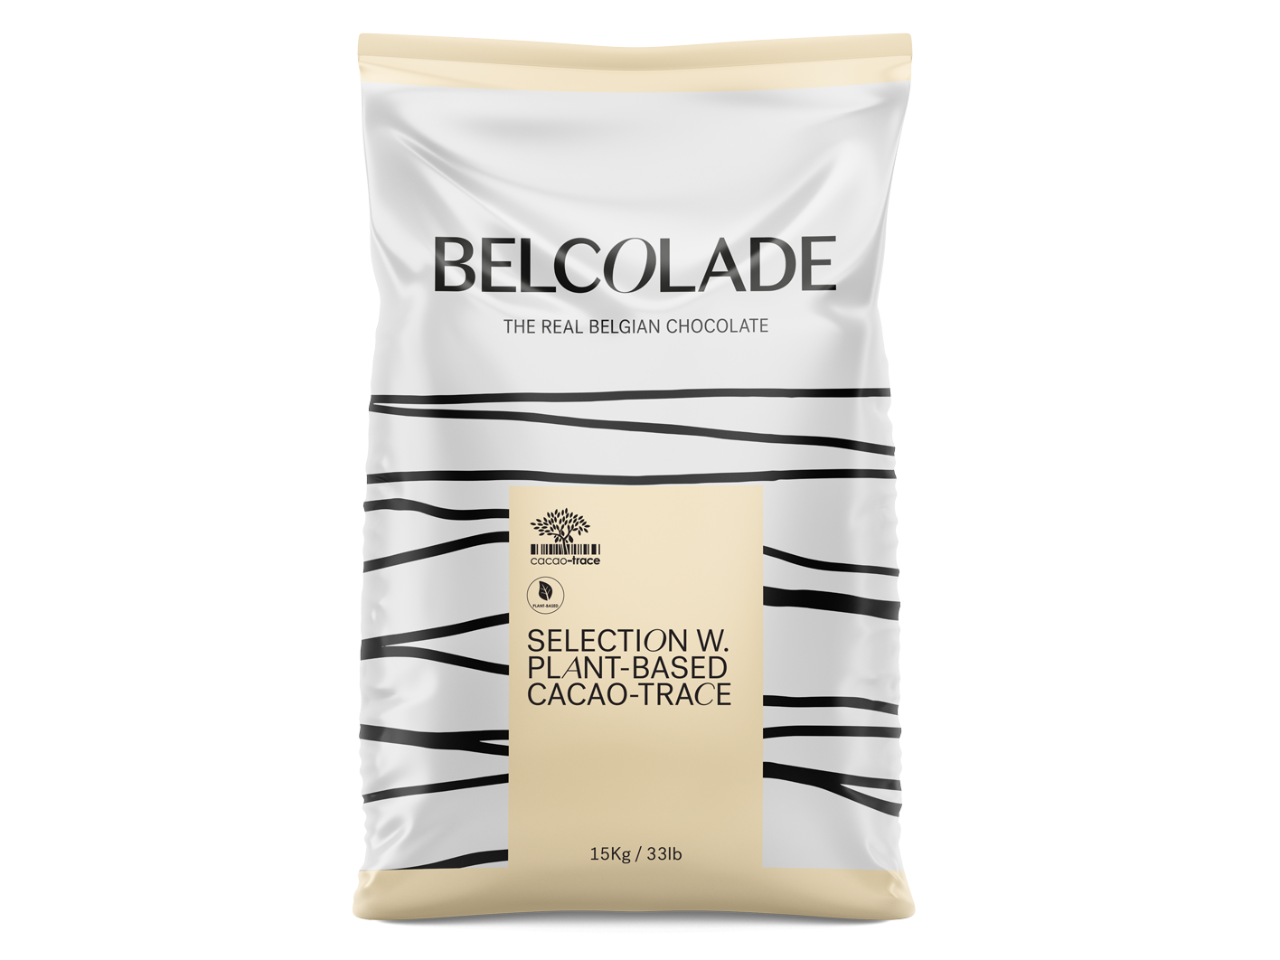 Belcolade Selection W. Plant-Based Cacao-Trace